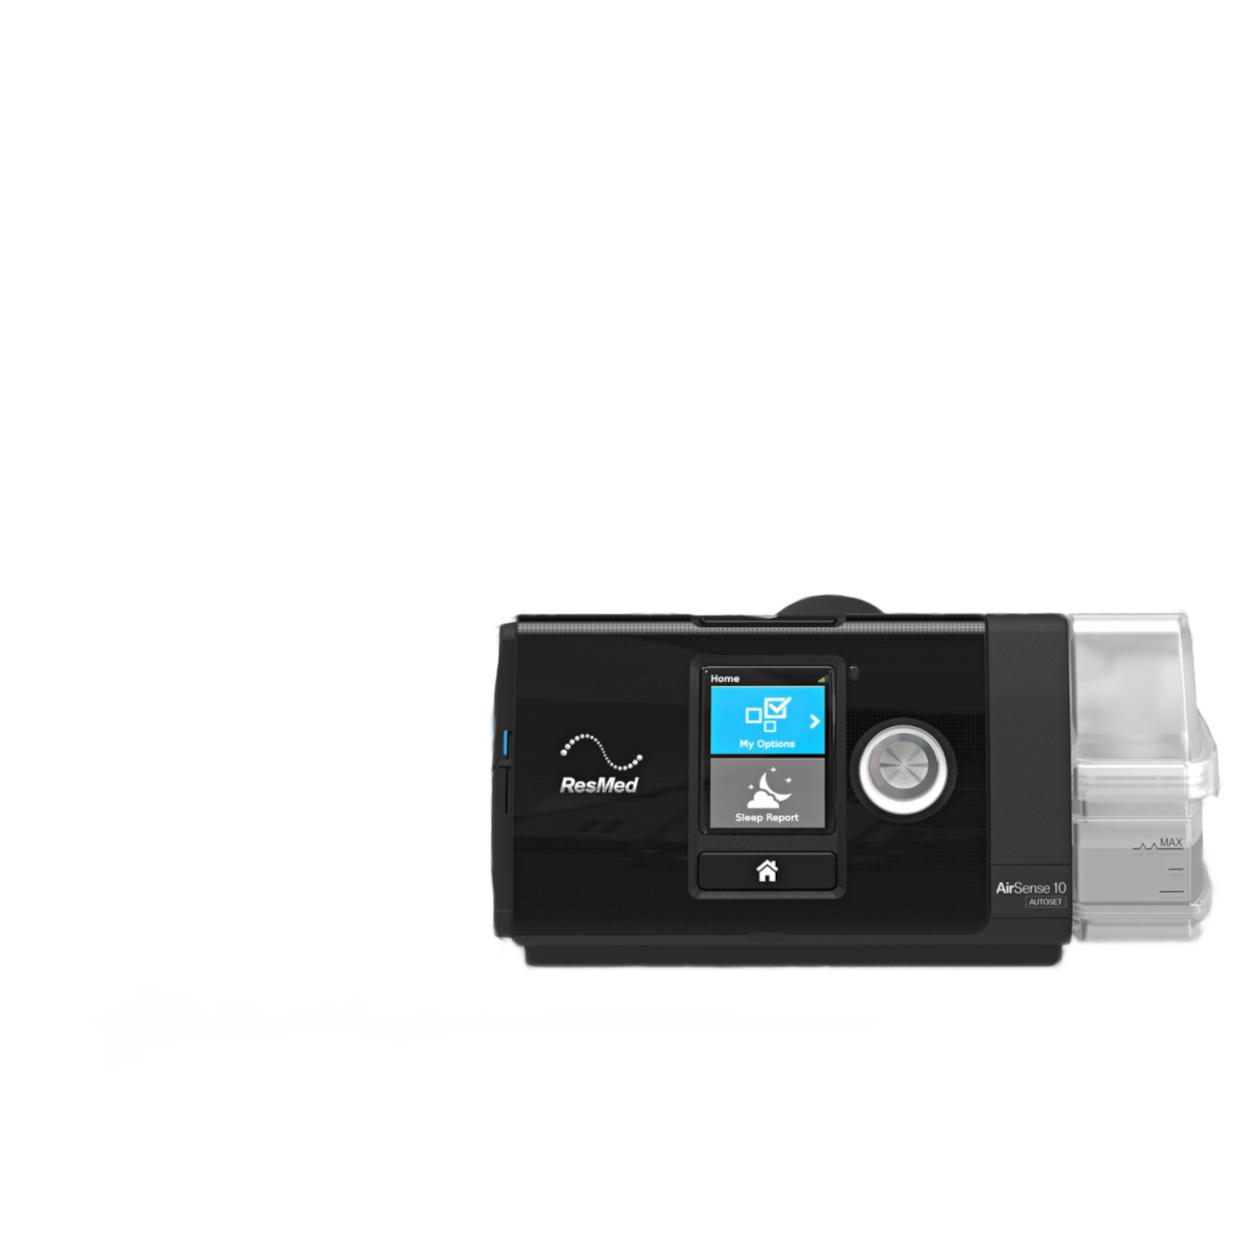 Resmed-AirSense™10-Autoset-Tripack-3G-CPAP-Device